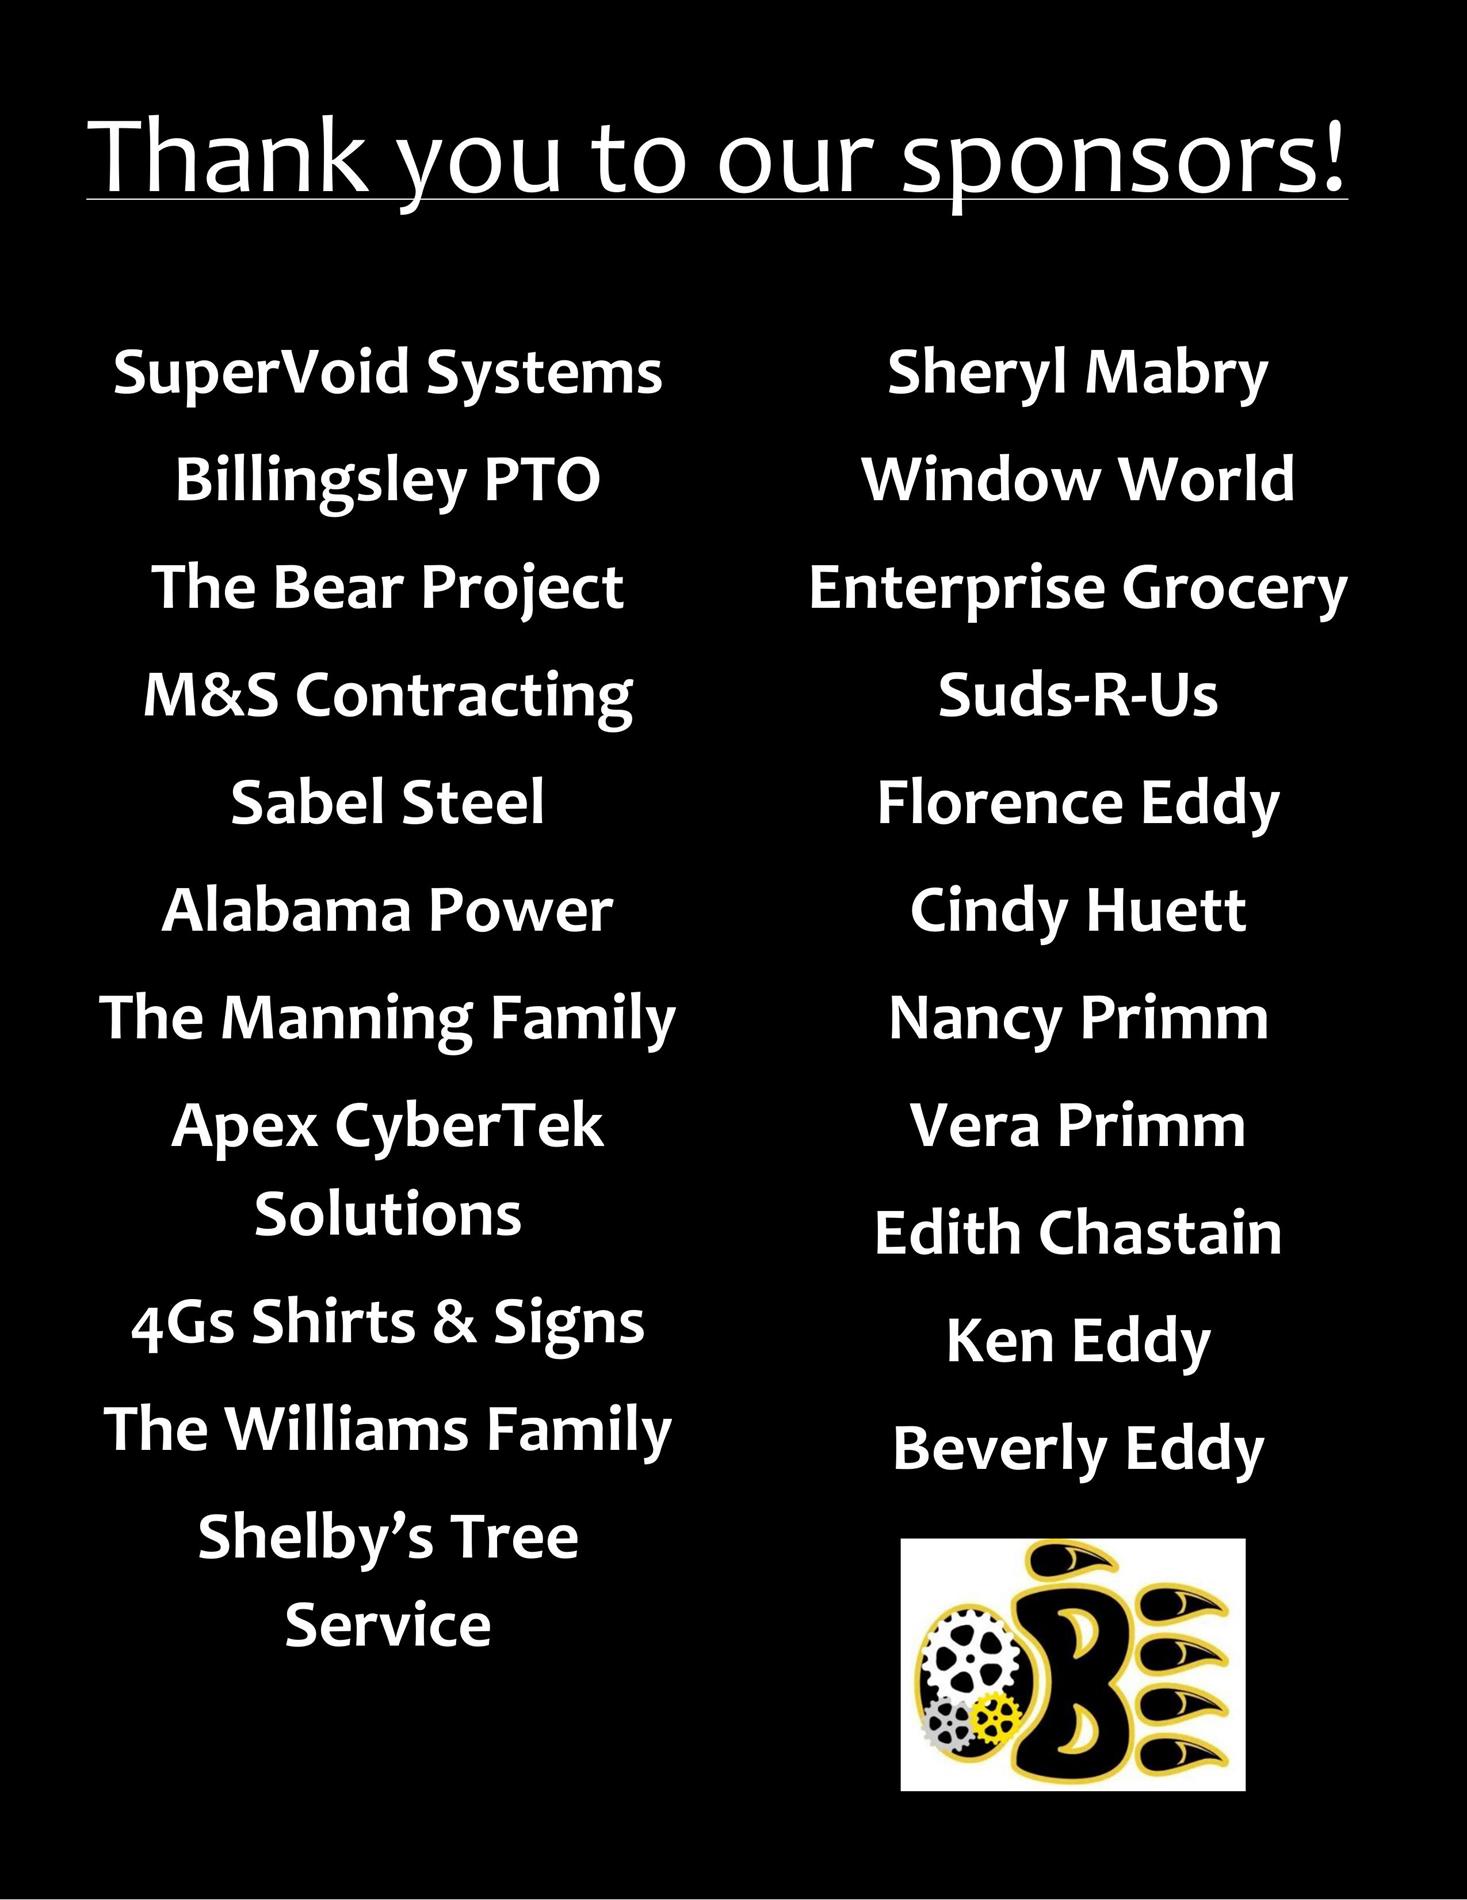 Thank you to our sponsors. SuperVoid Systems, Billingsley PTO, The Bear Project, M&S Contracting, Sabel Steel, Alabama Power, The Manning Family, Apex CyberTek Solutions, 4Gs Shirts & Signs, The Williams Family, Shelby’s Tree Service ,  Sheryl Mabry, Window World, Enterprise Grocery, Suds-R-Us, Florence Eddy, Cindy Huett, Nancy Primm, Vera Primm, Edith Chastain, Ken Eddy, Beverly Eddy